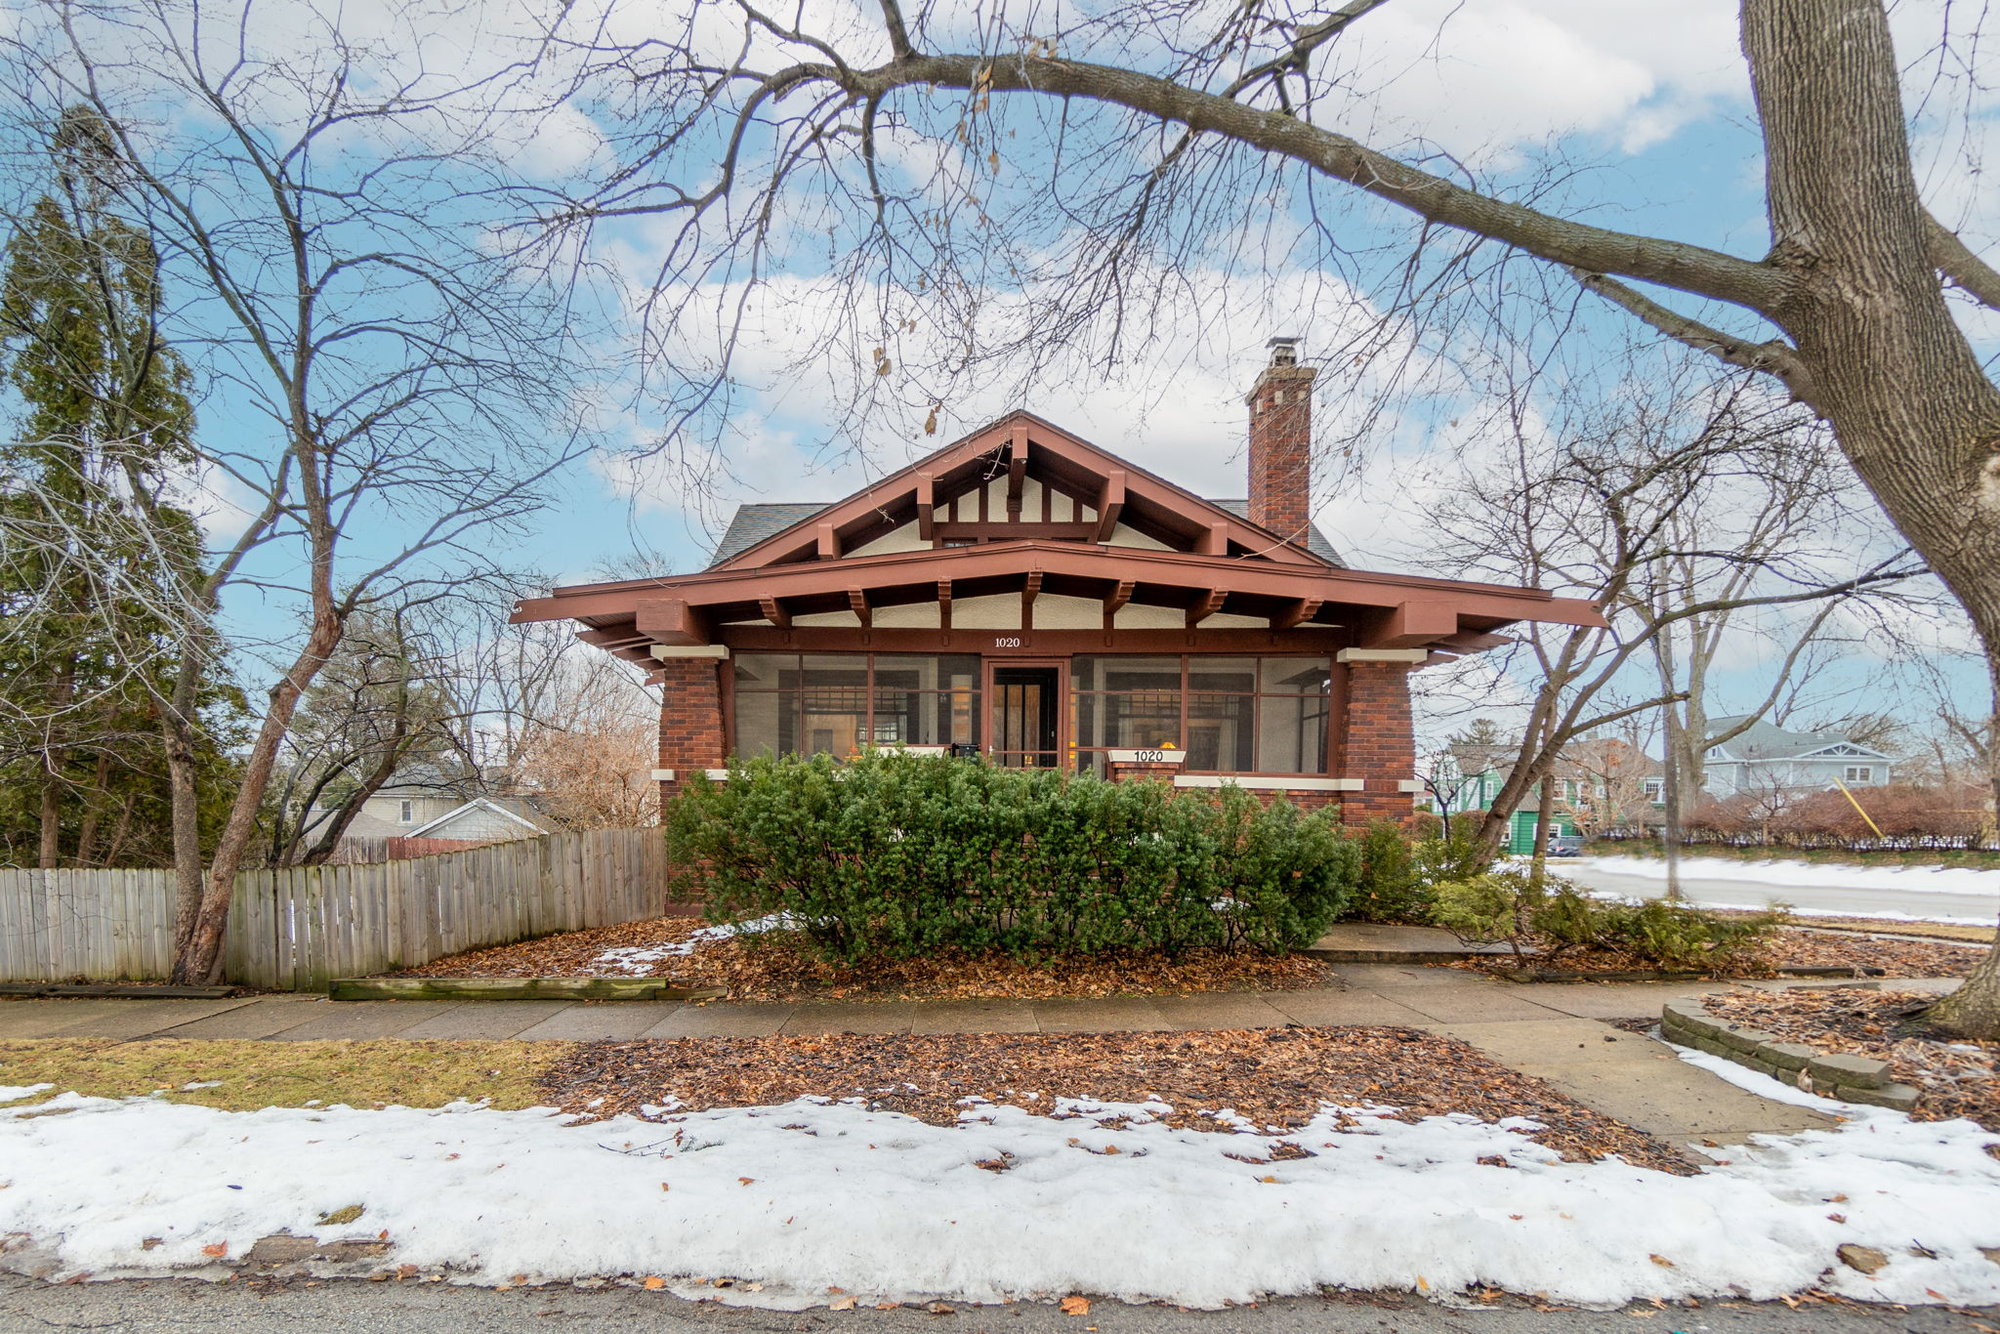 The Cedar Falls Craftsman Bungalow You Will Instantly Fall in Love With